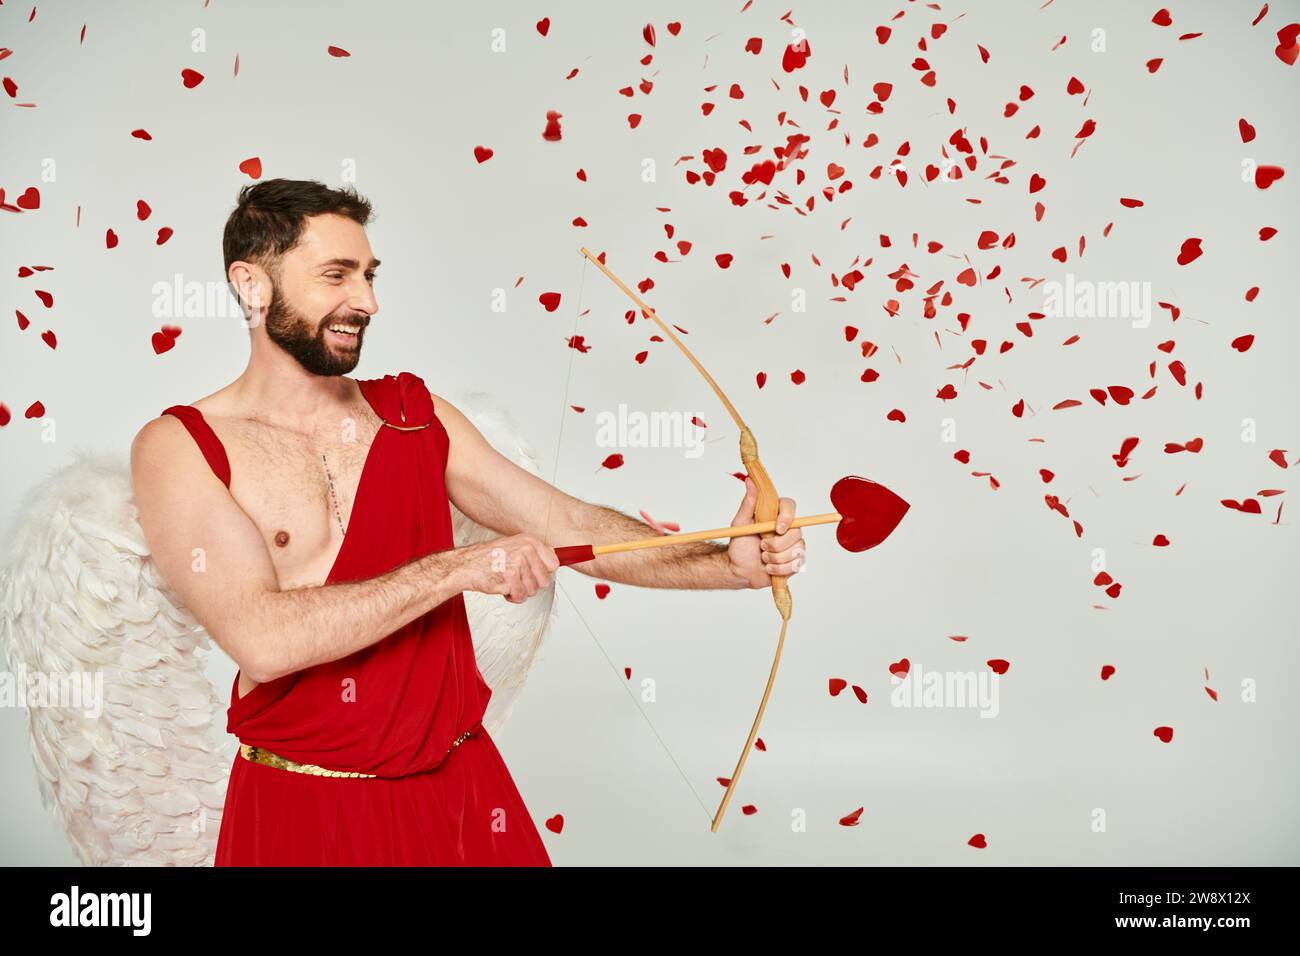 smiling bearded cupid man archering with heart-shaped arrow under red confetti, Saint Valentines day Stock Photo